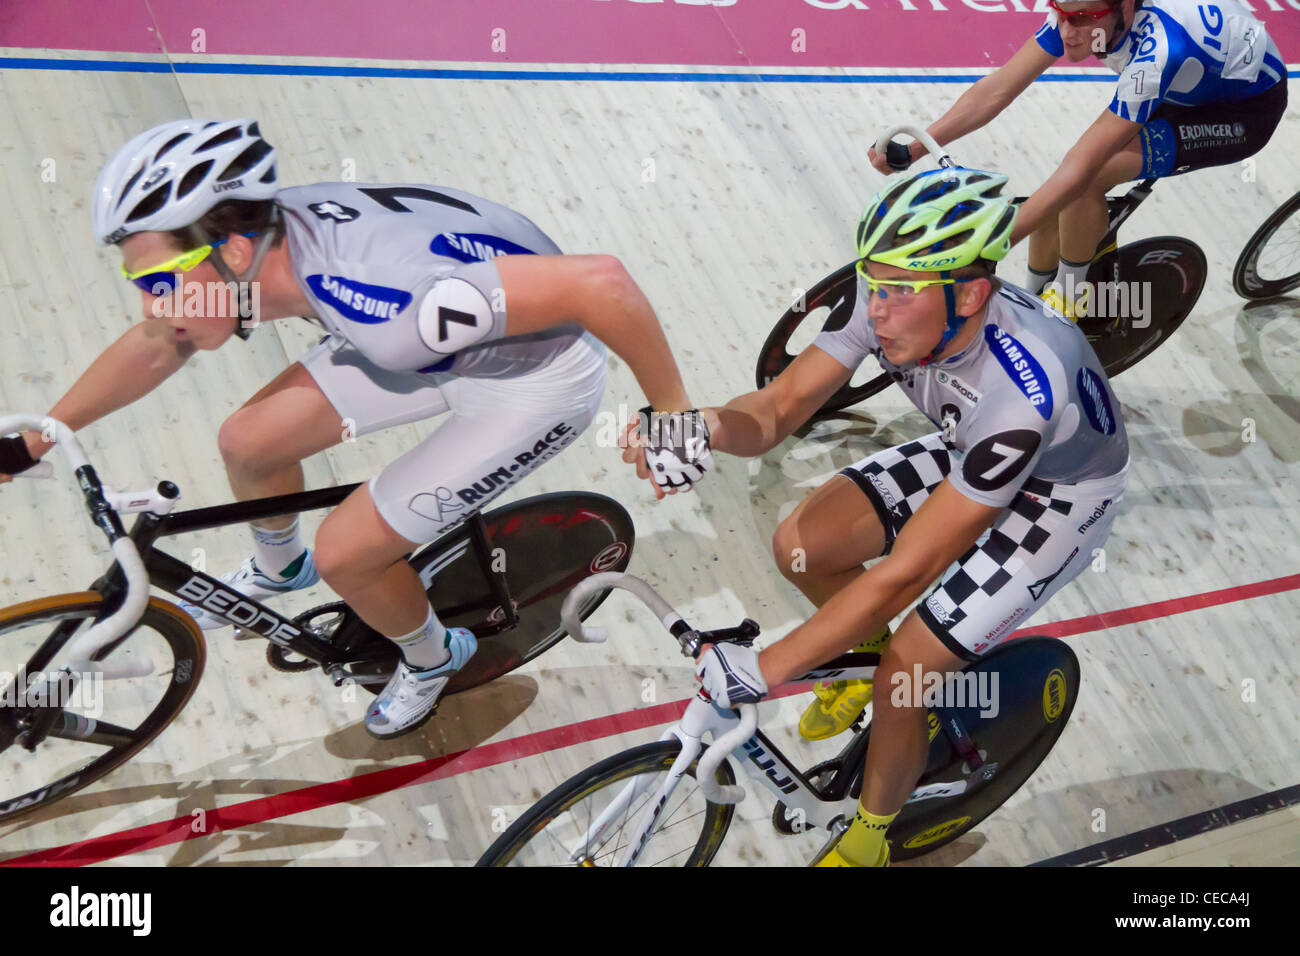 team Kendler (l) Schmidt (r) changes lead by joining hands and transferring speed at Sixday-Nights Zuerich 2011 at Zurich Stock Photo